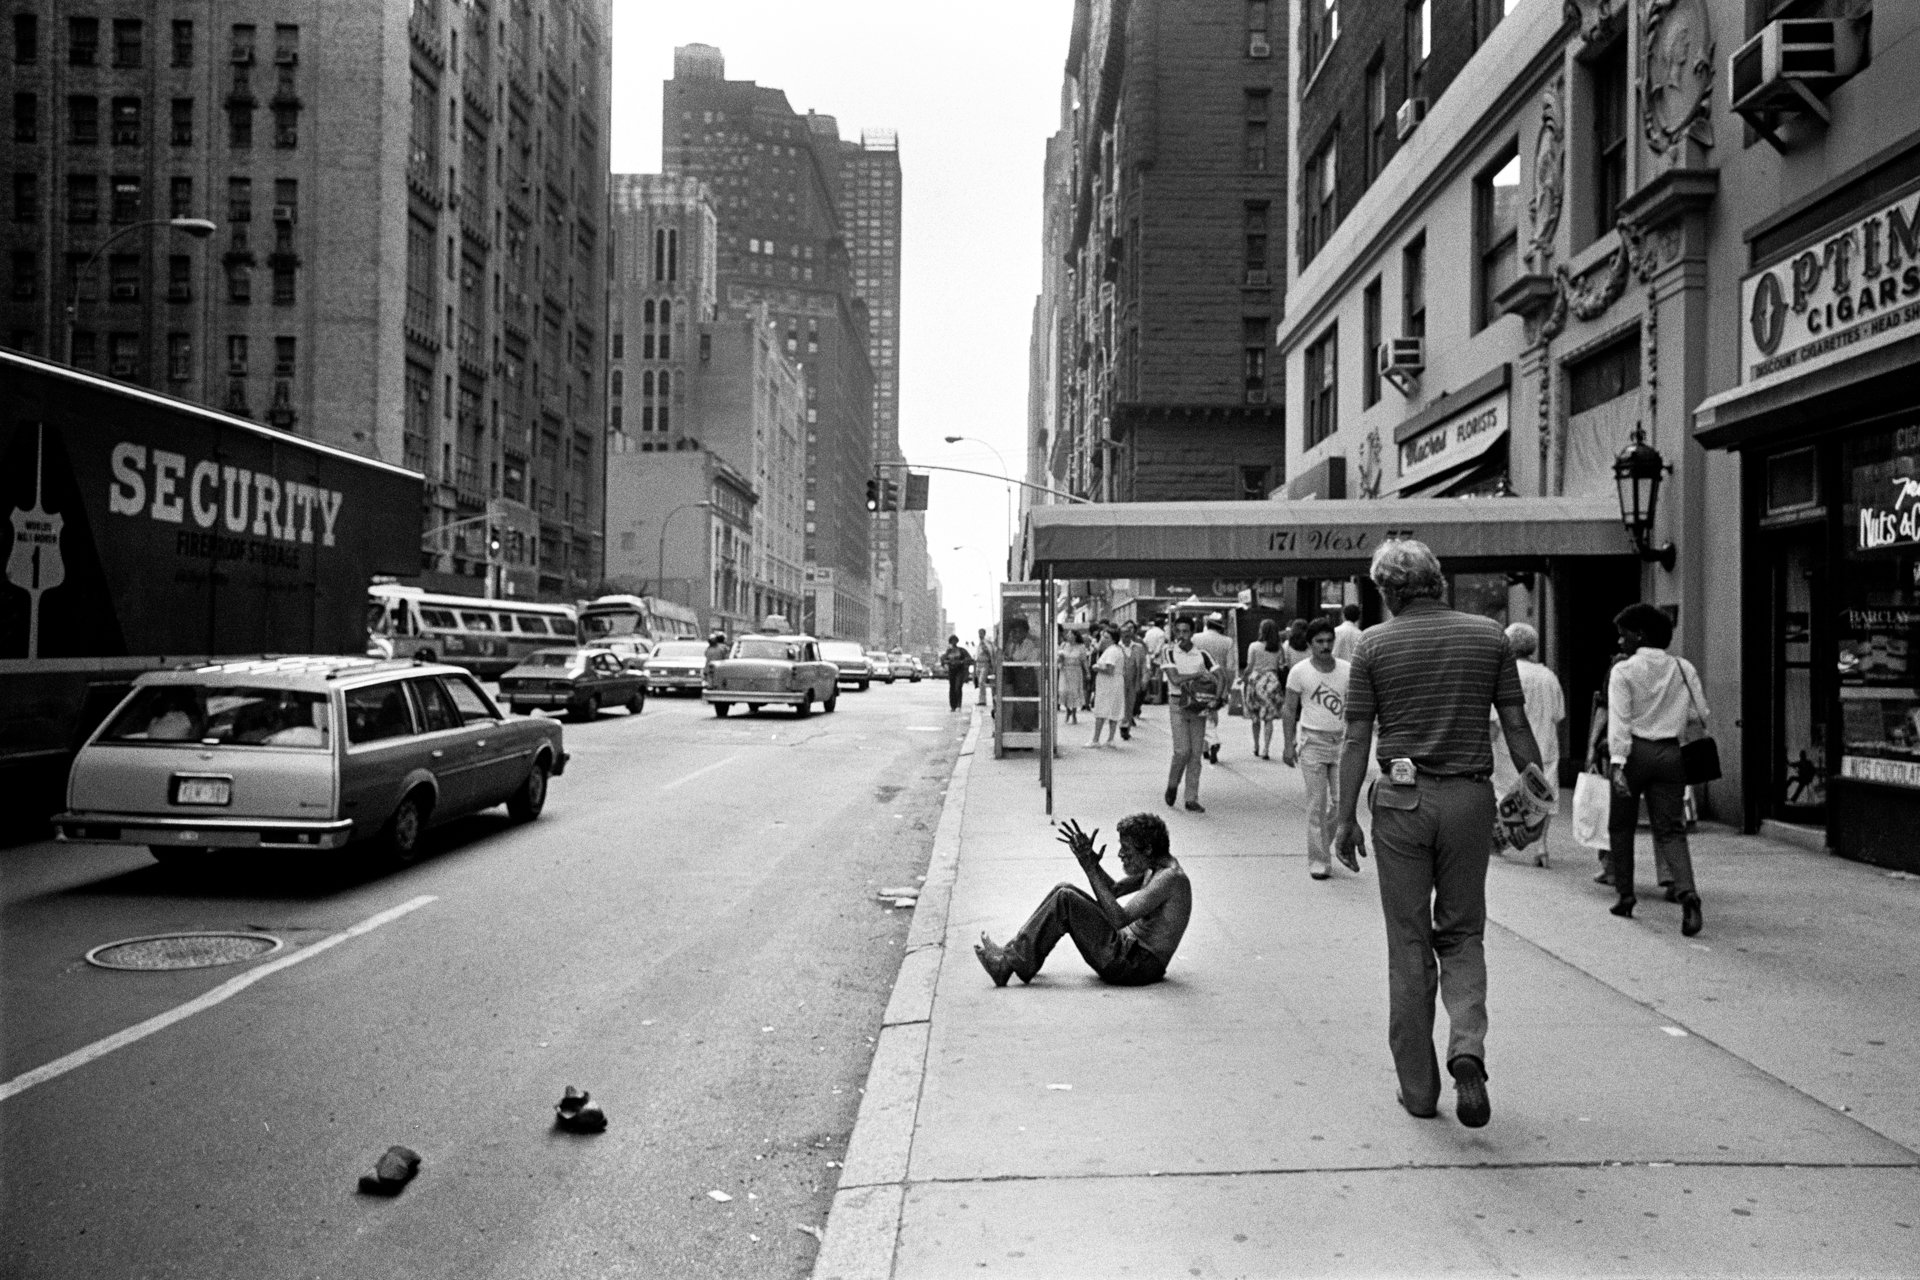 Security, 57th St., NYC, 1981